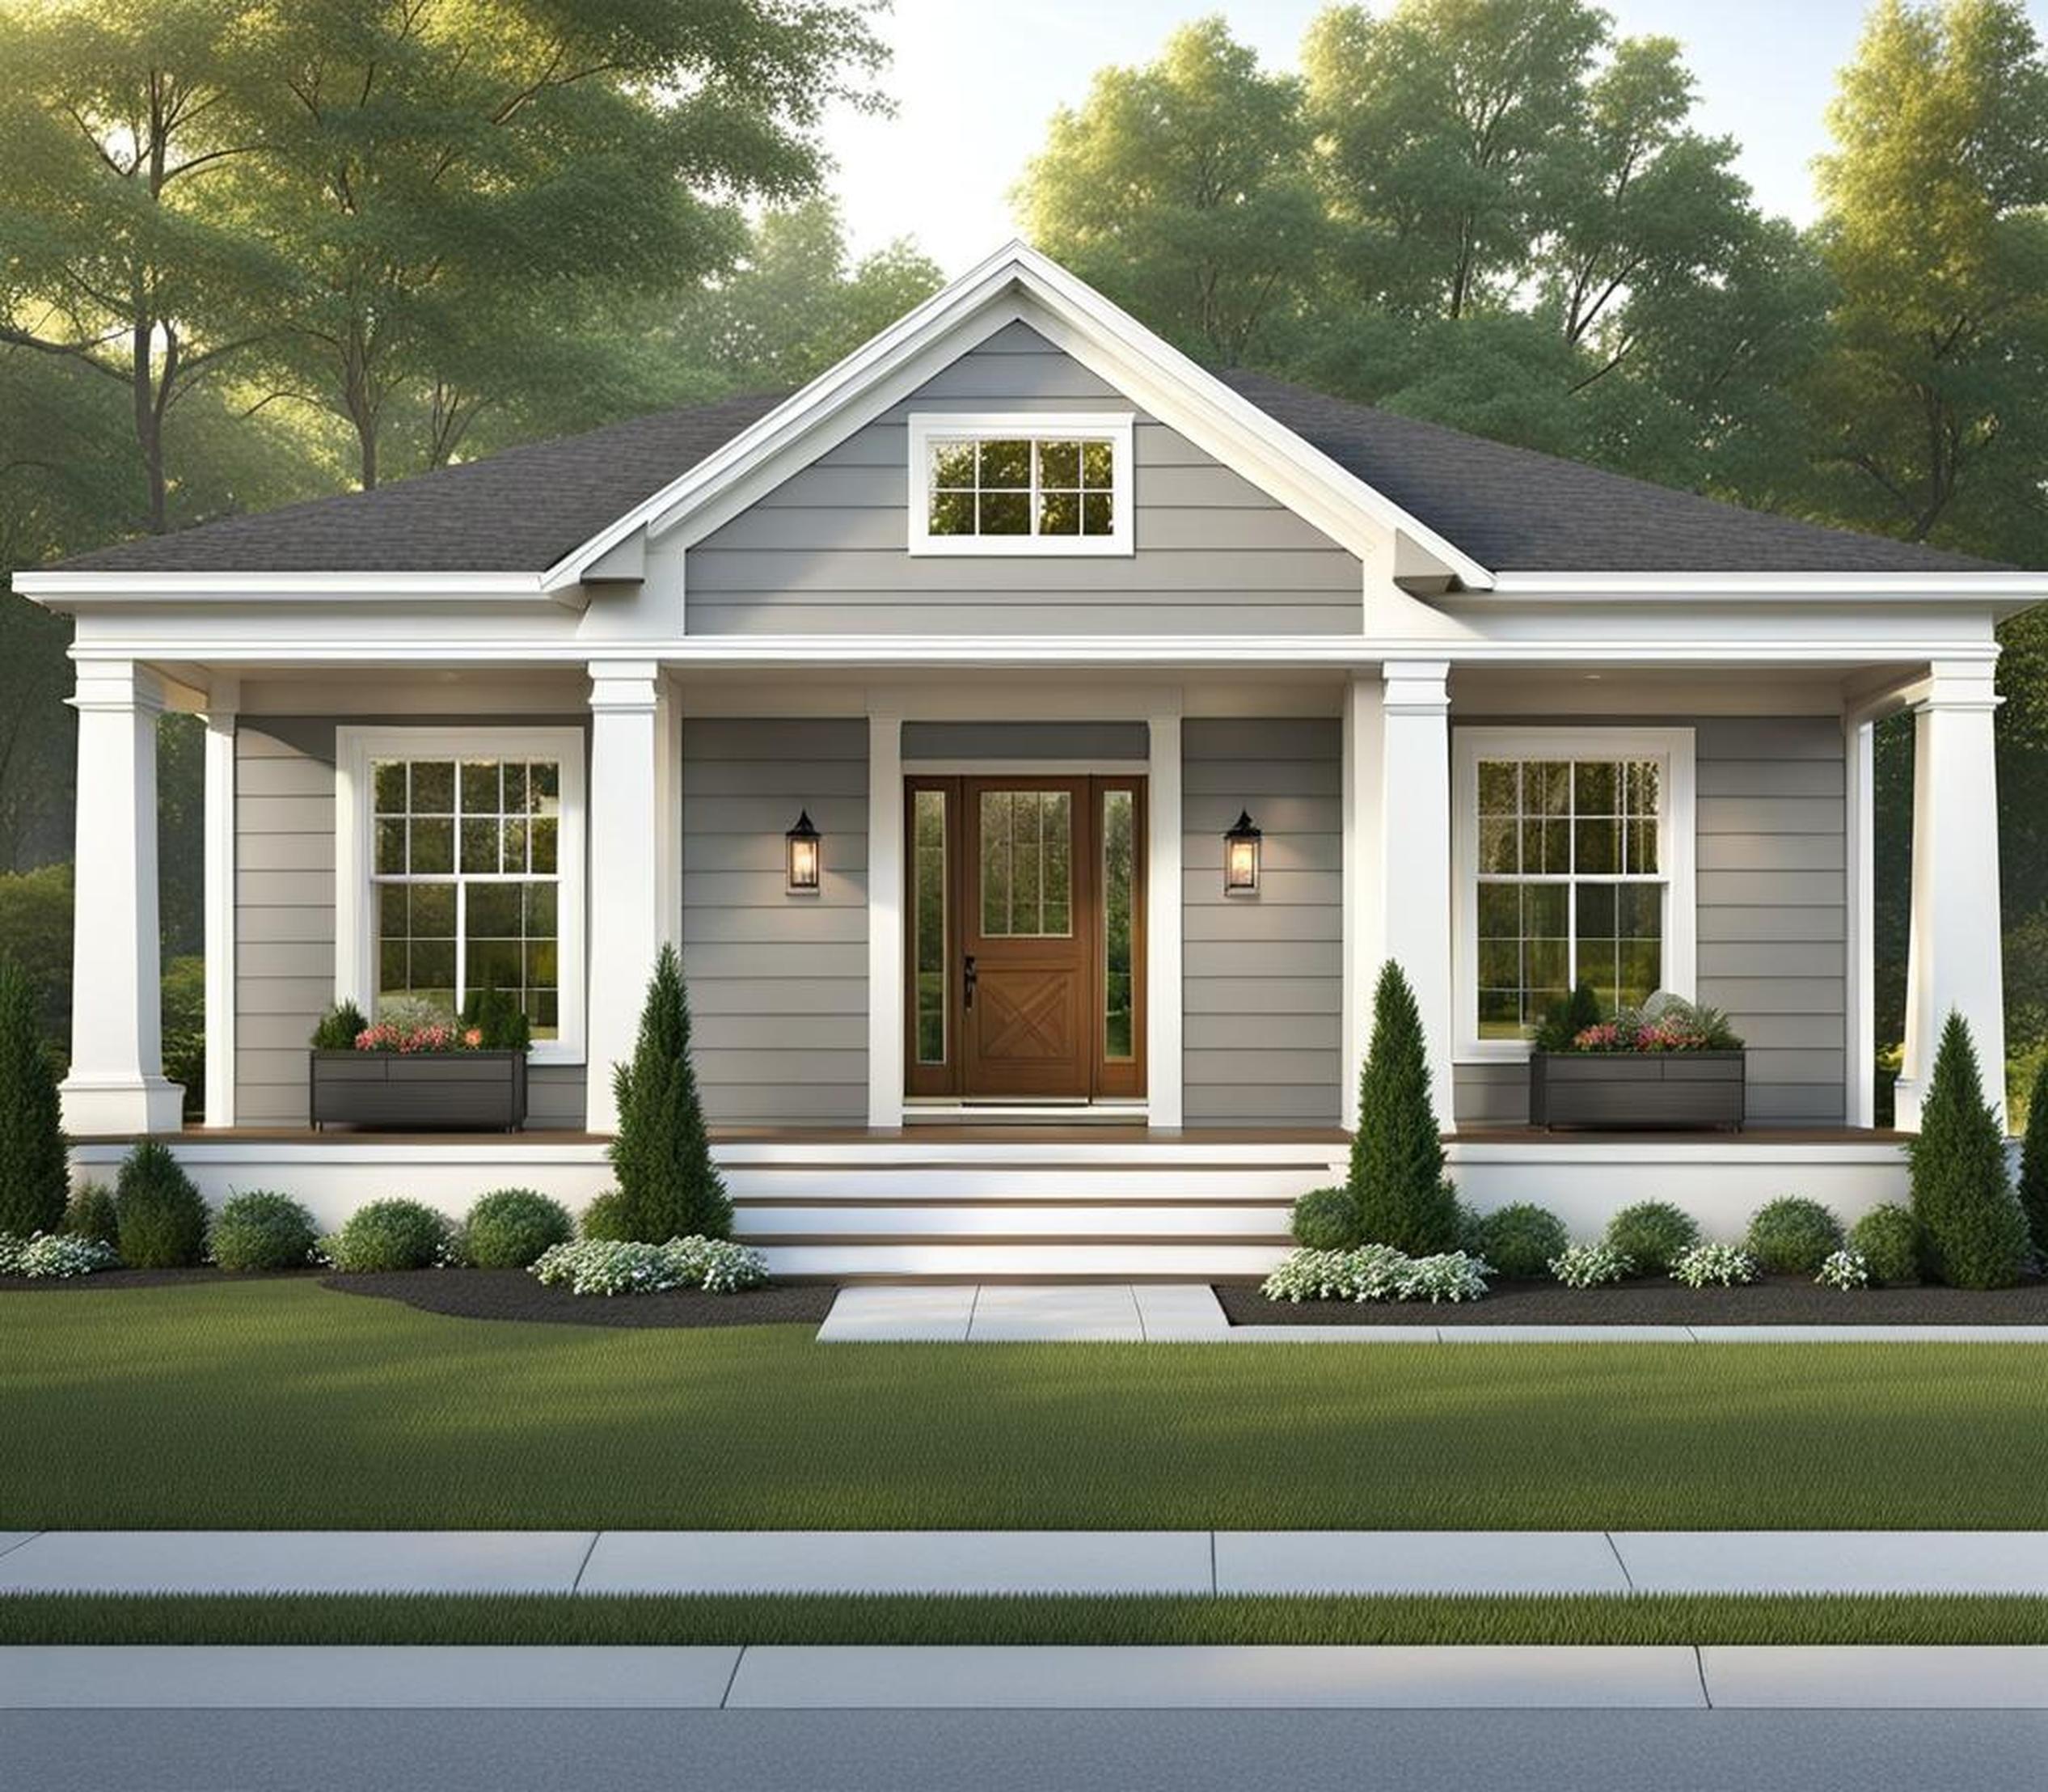 Boost Exterior Appeal With Can’t-Miss Color Agreeable Gray